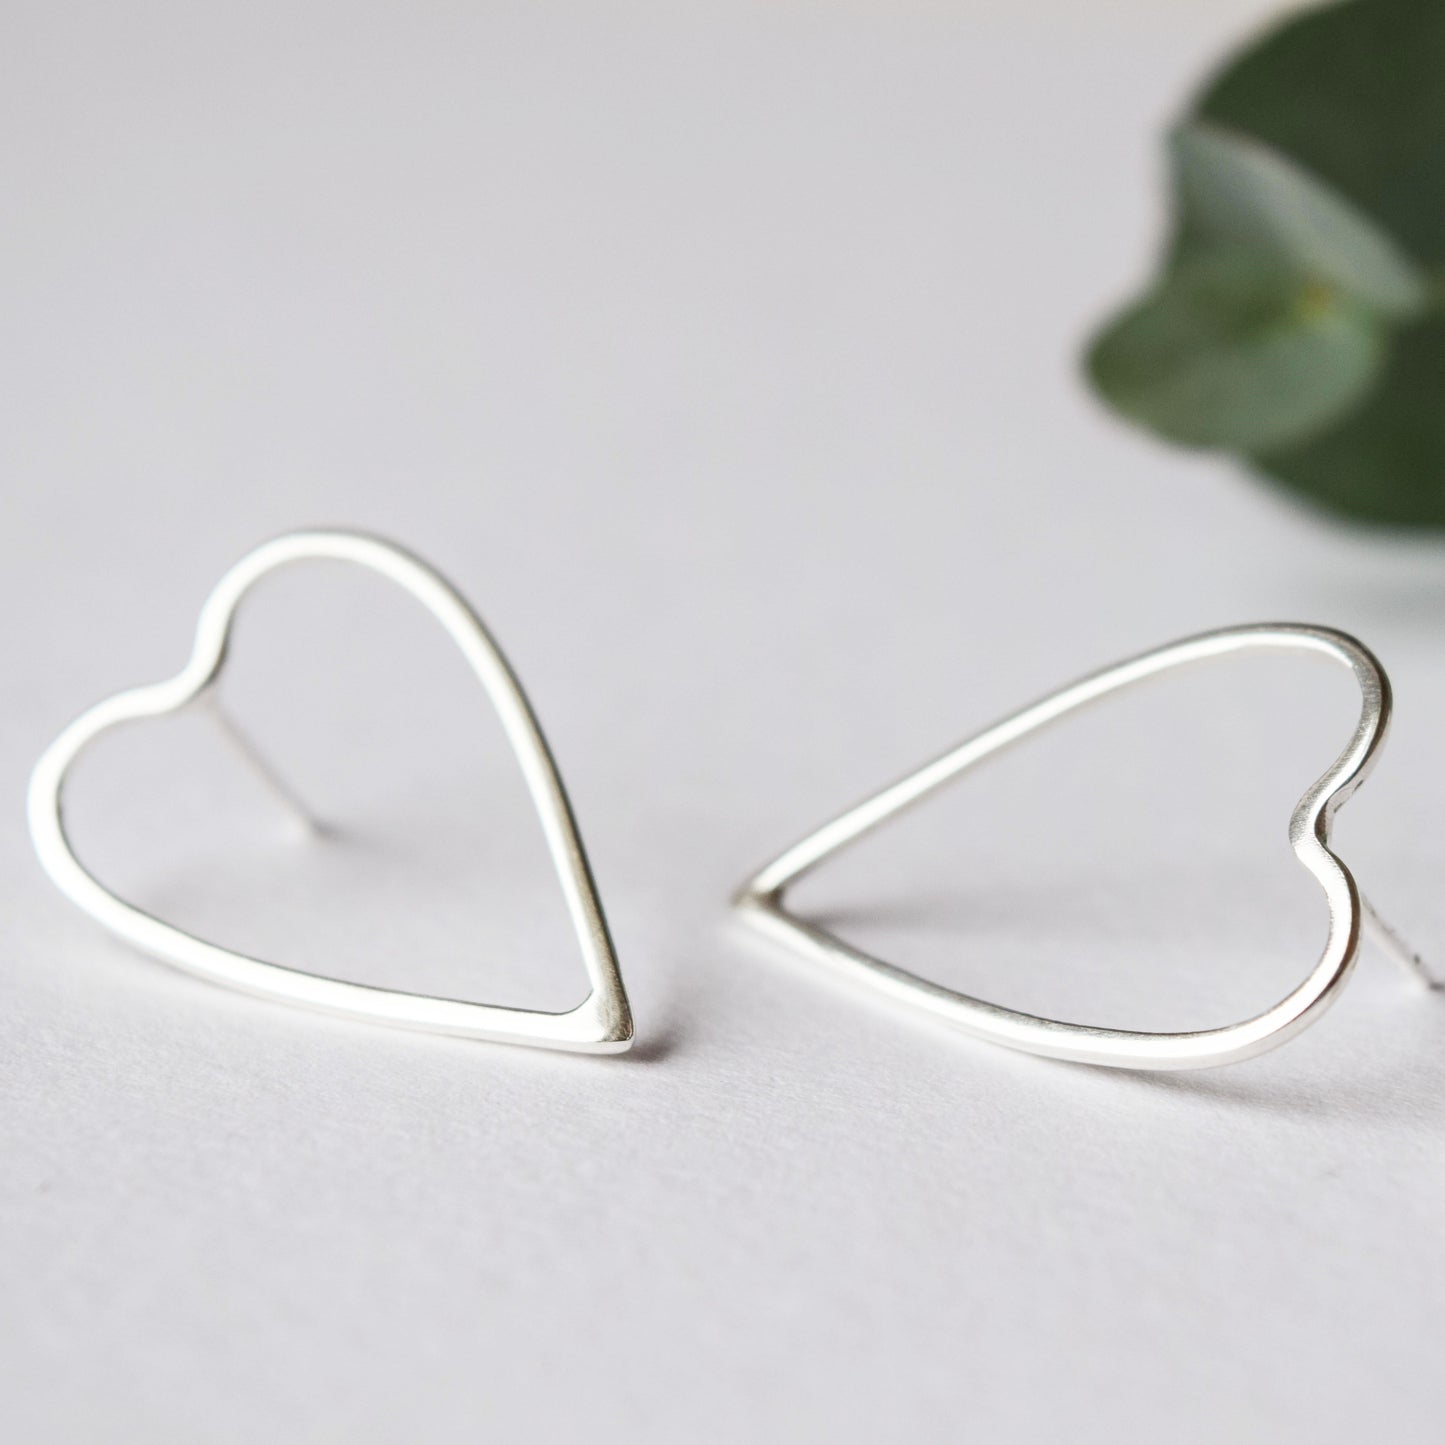 product image showing close up of silver heart earrings